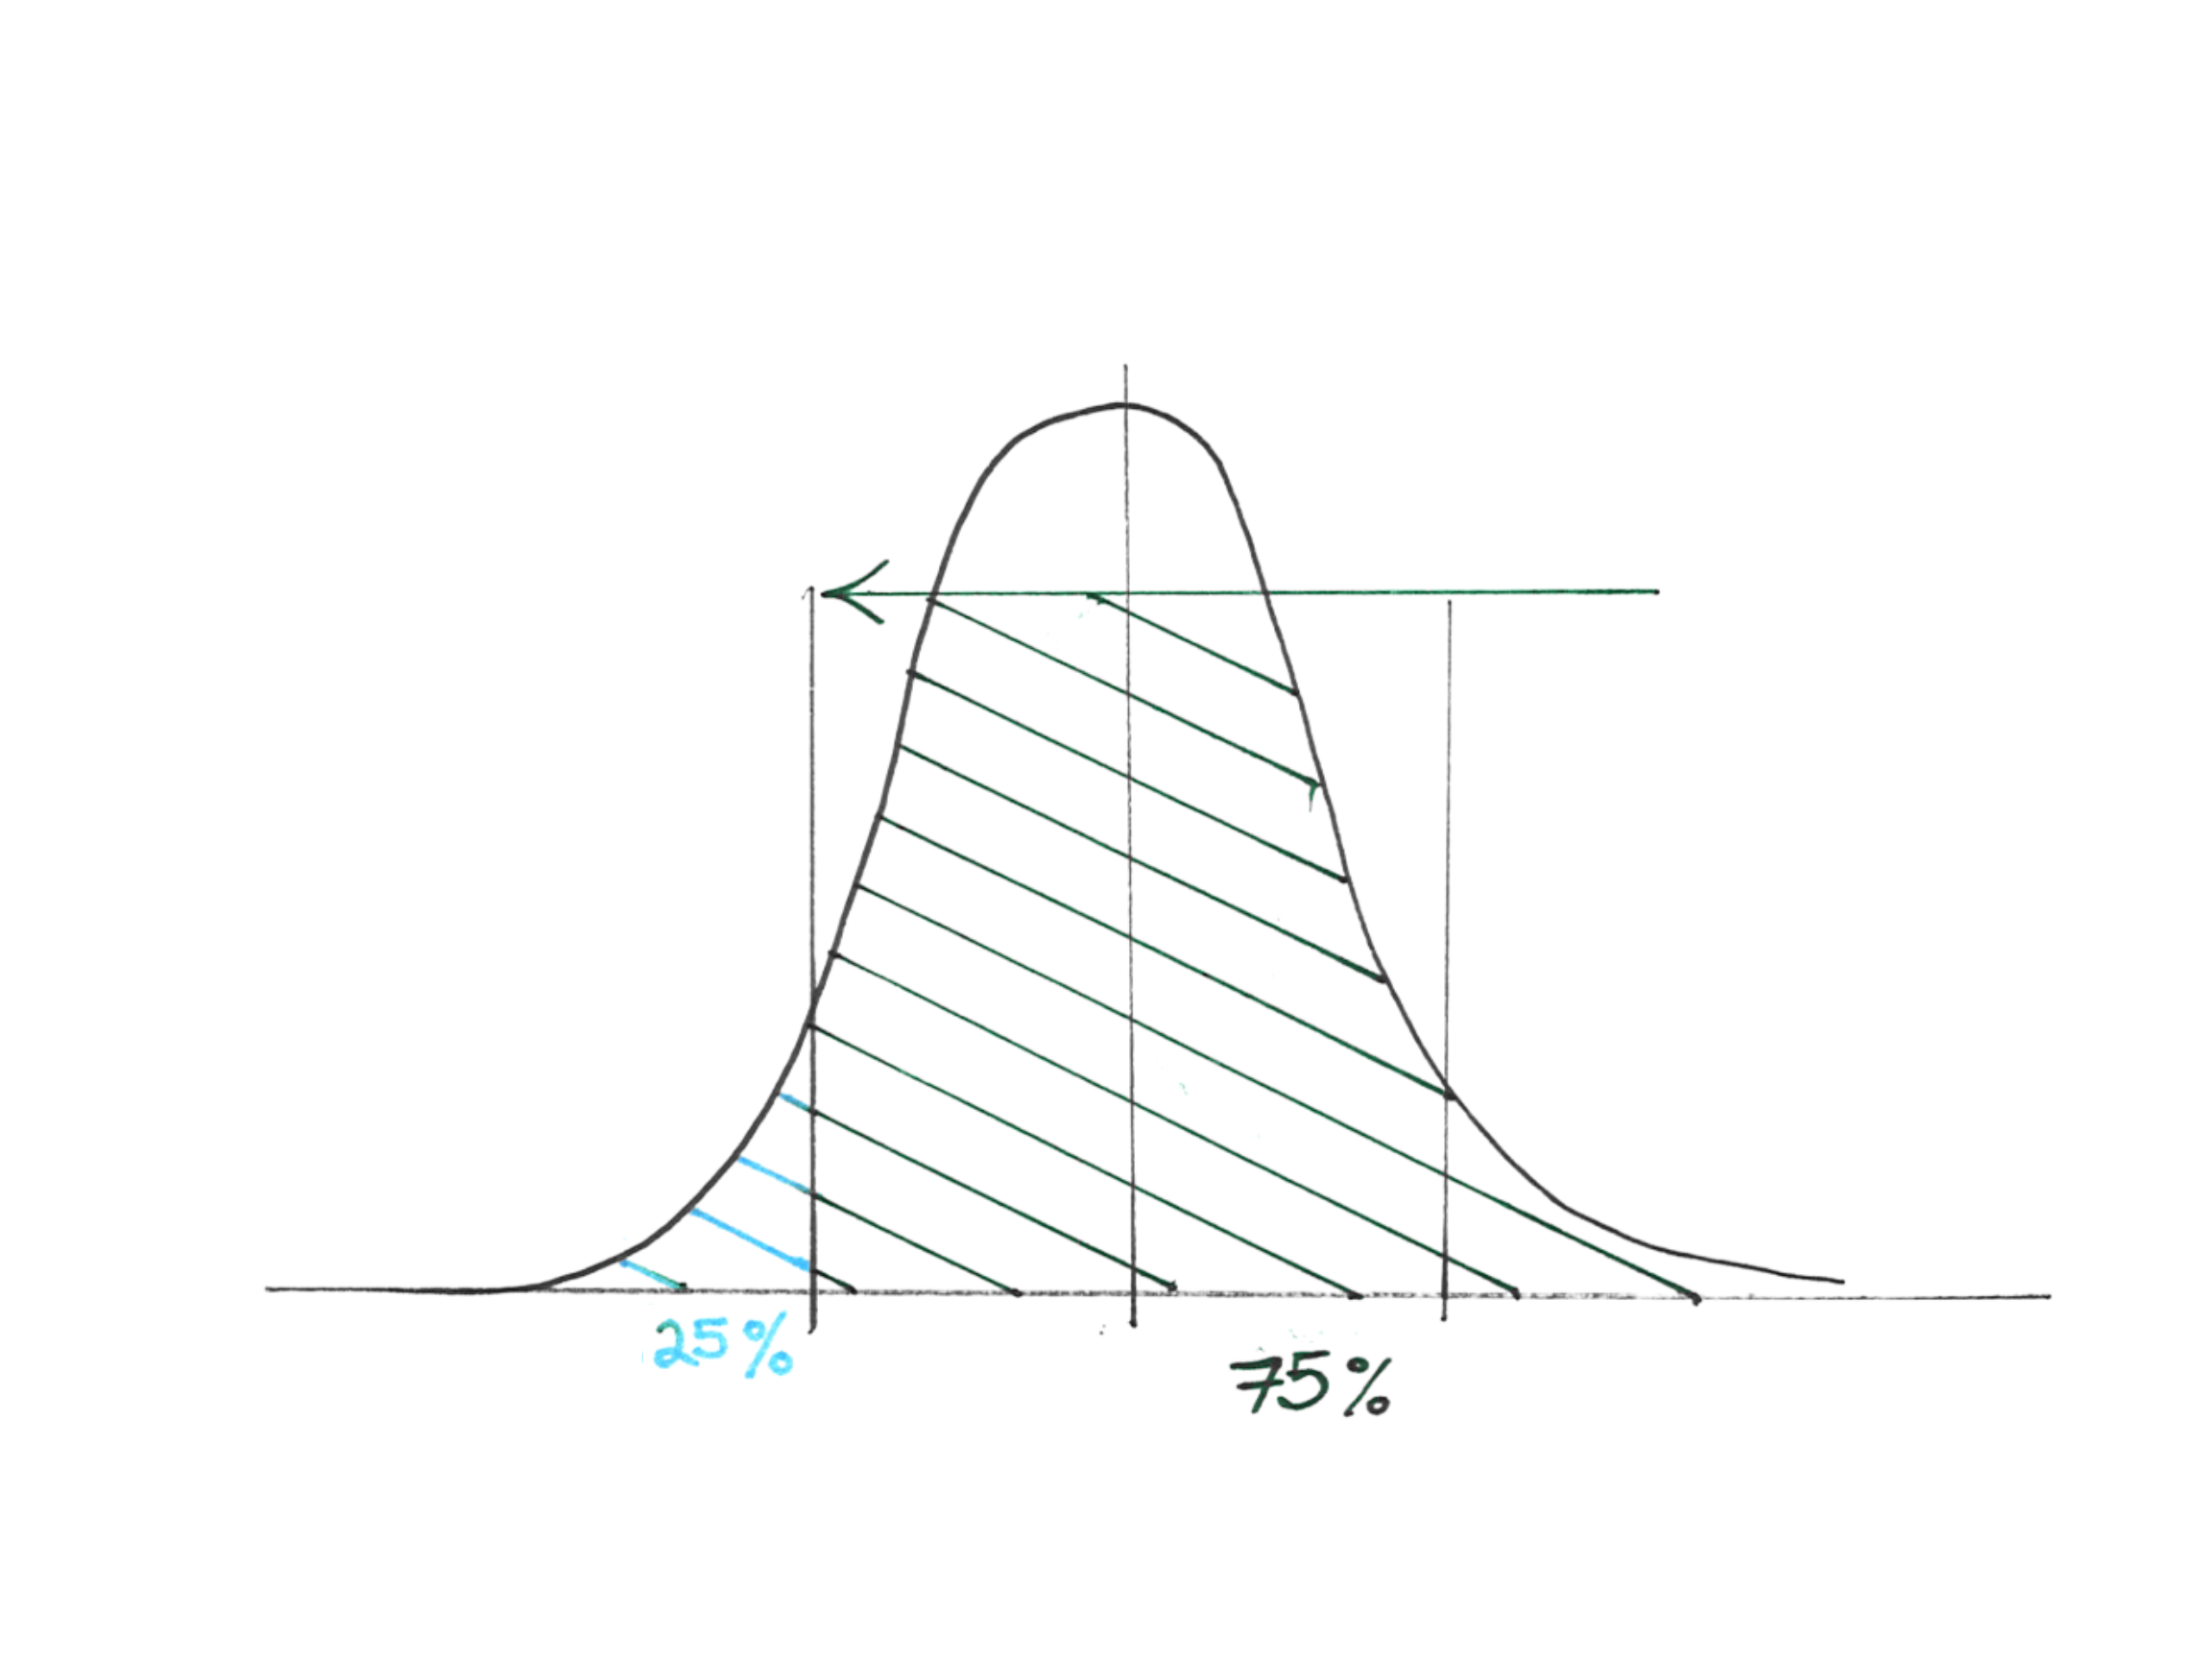 A bell curve divided in 75% and 25%.